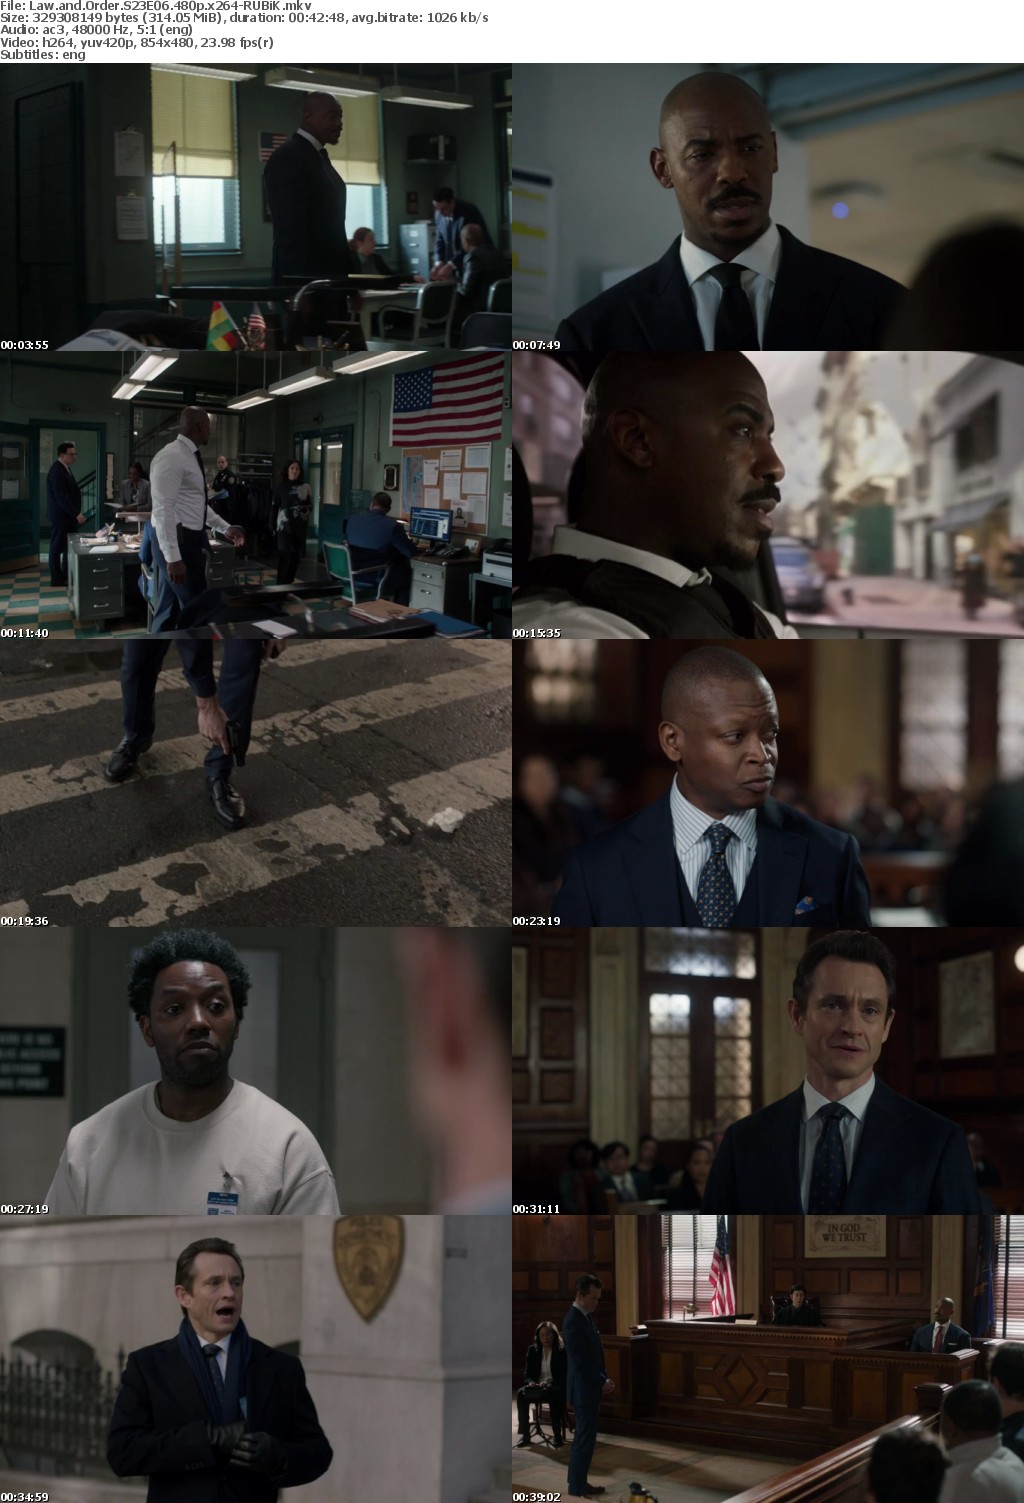 Law and Order S23E06 480p x264-RUBiK Saturn5